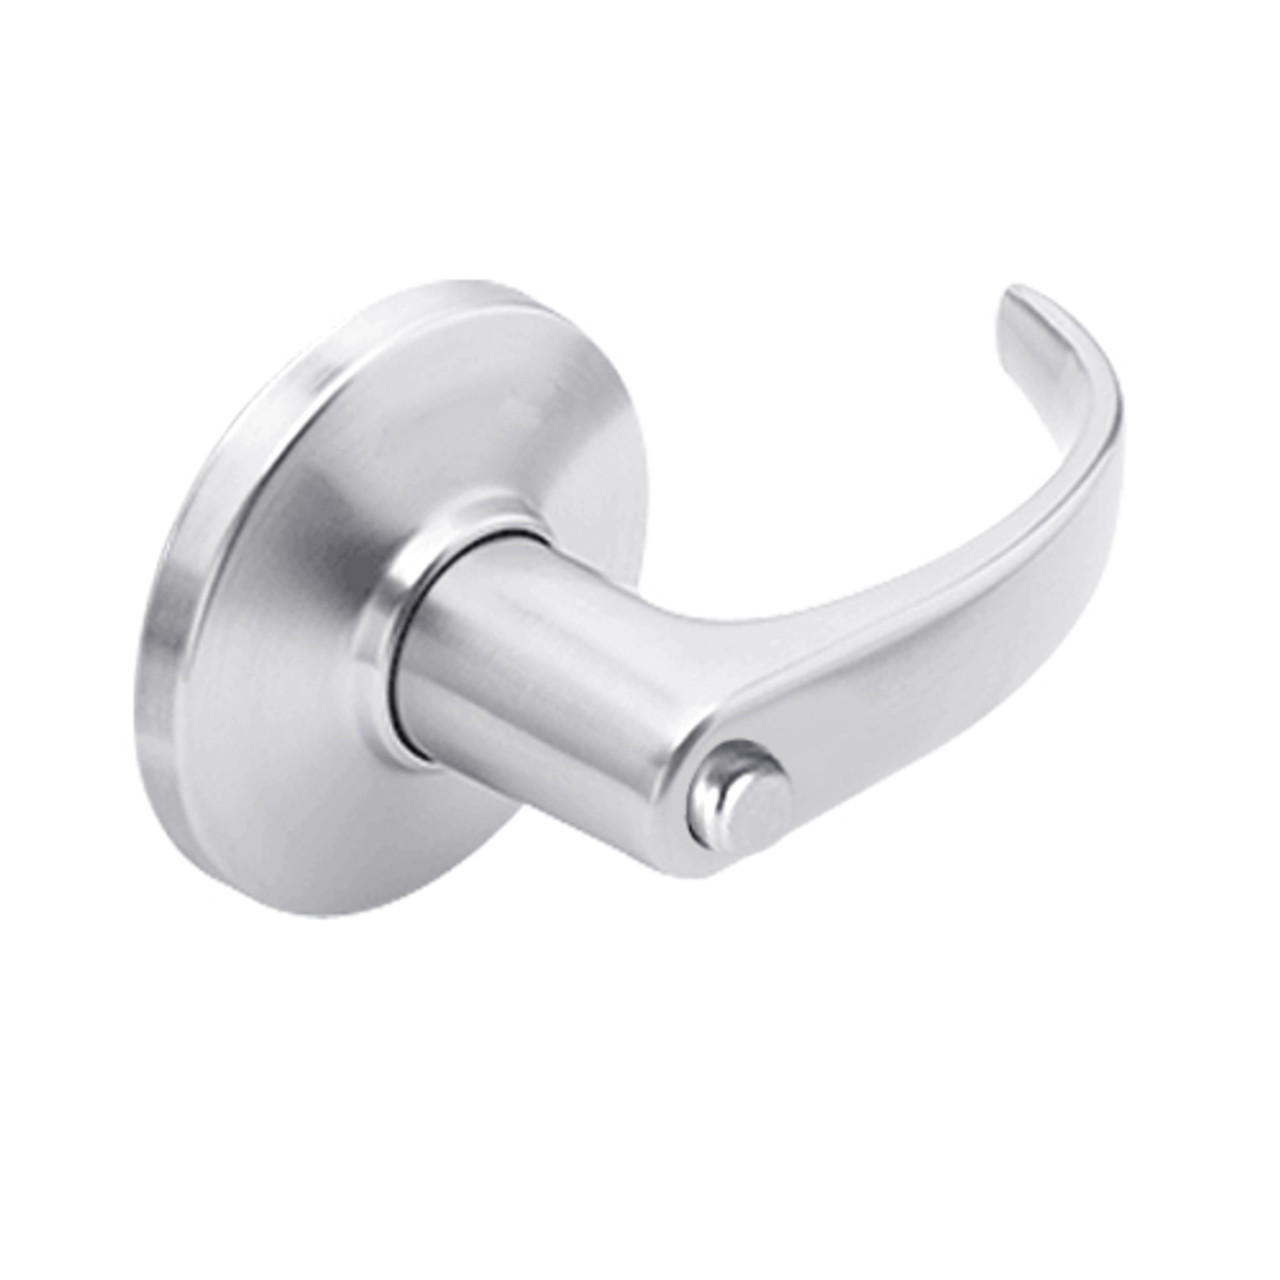 9K30LL14DS3625LM Best 9K Series Hospital Privacy Heavy Duty Cylindrical Lever Locks in Bright Chrome